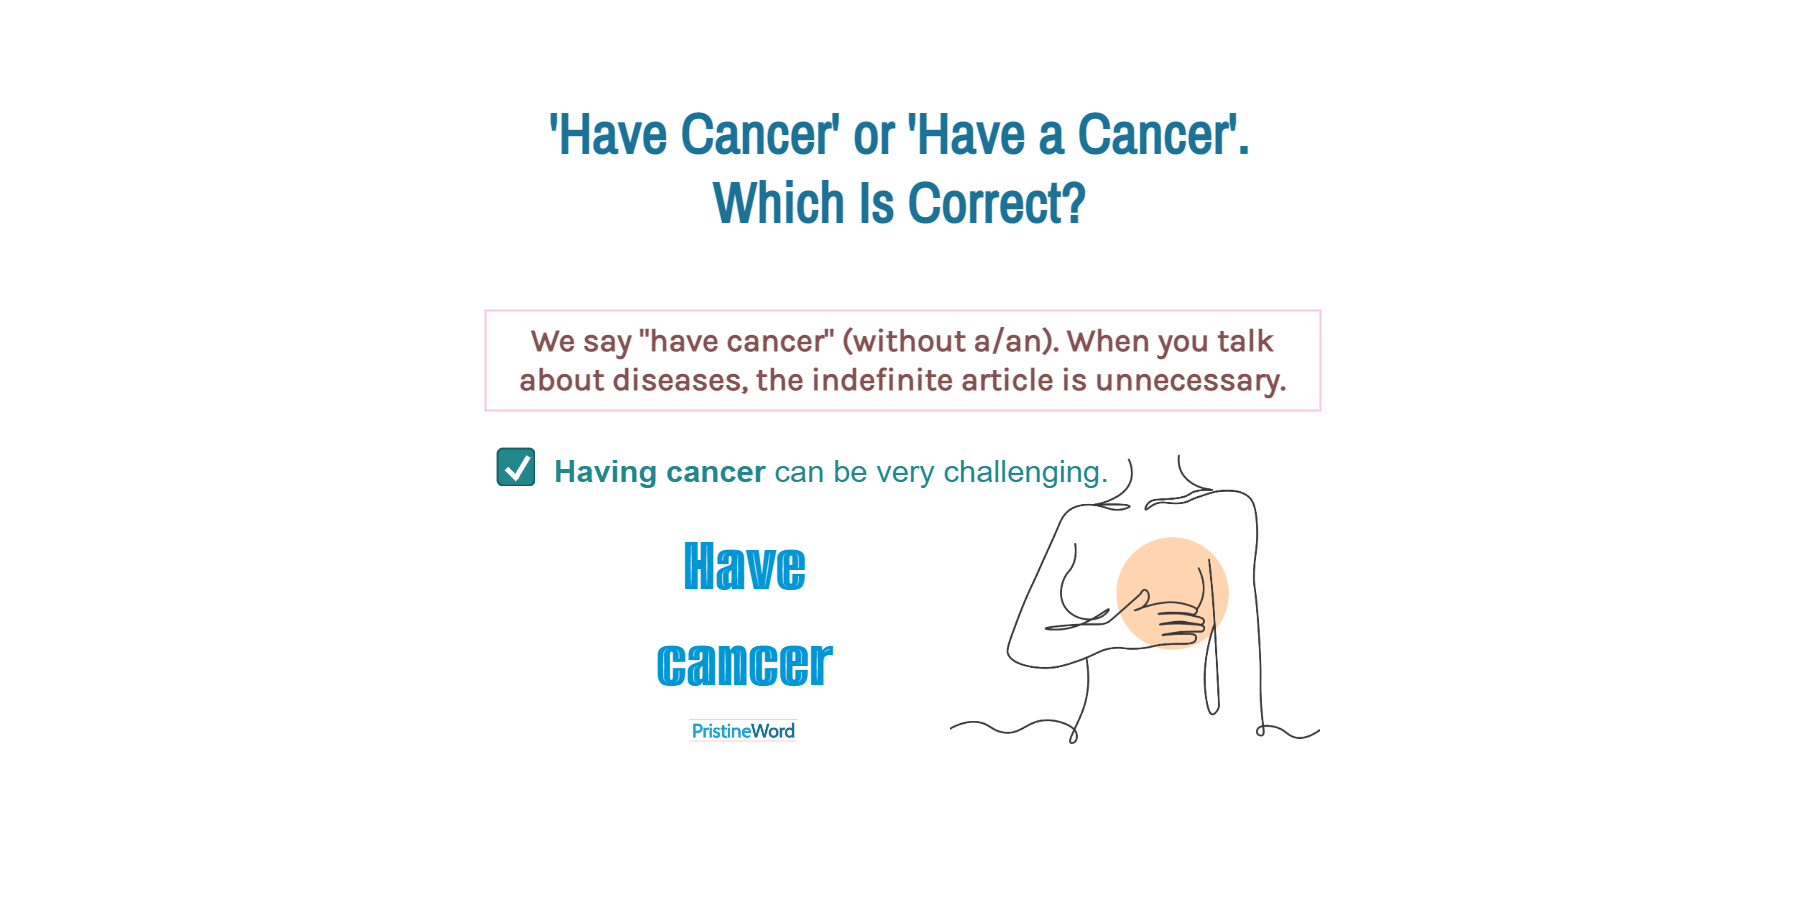 Have Cancer or Have a Cancer. Which Is Correct?